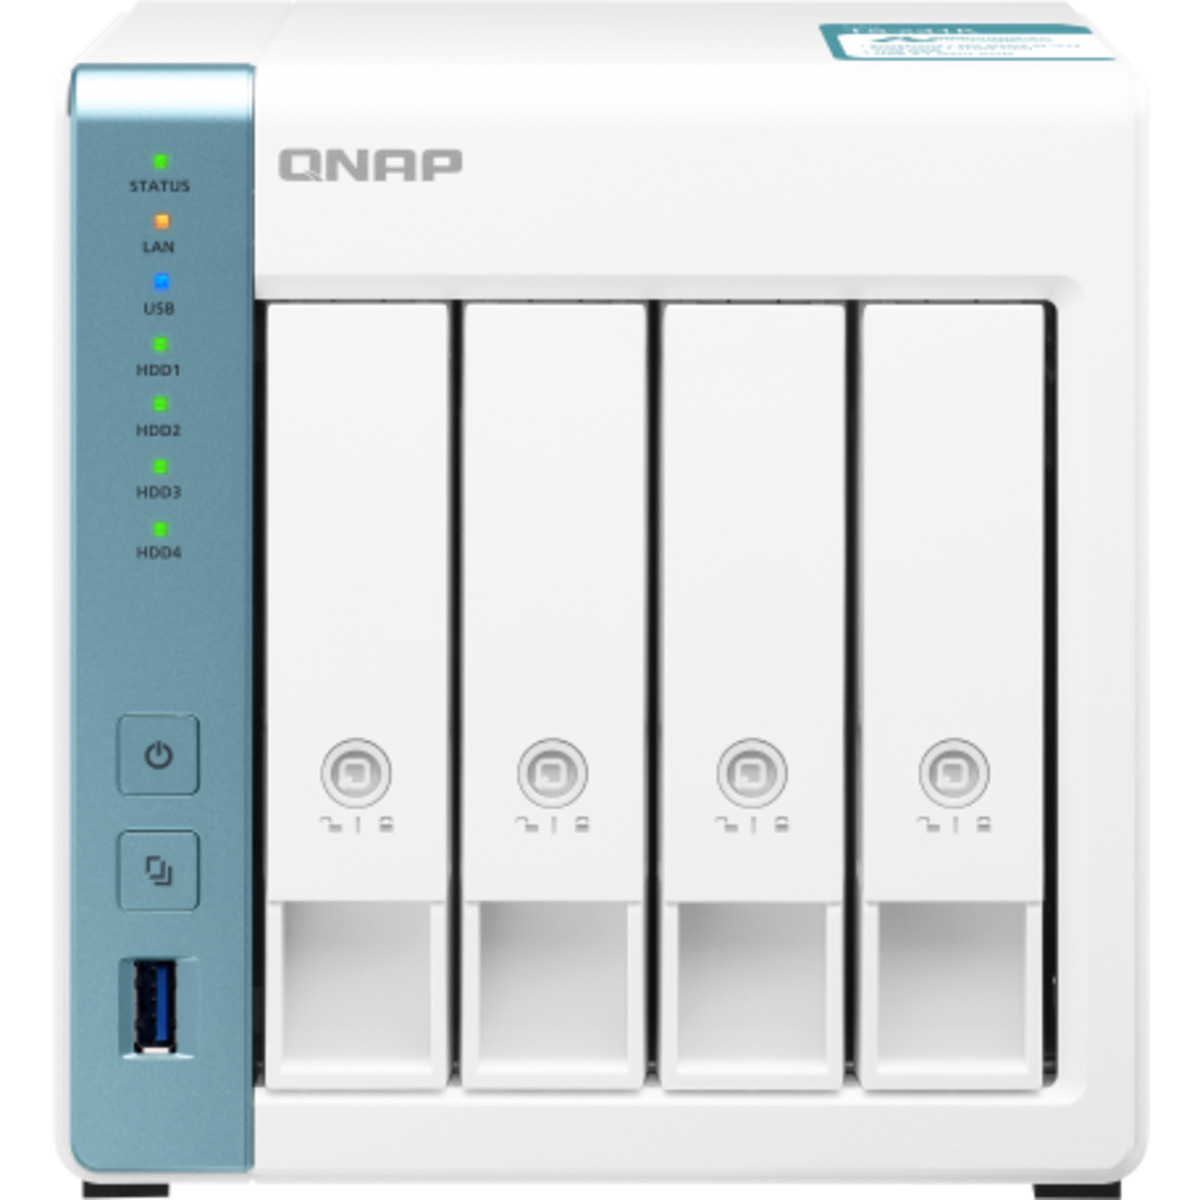 buy $629 QNAP TS-431K 8tb Desktop NAS - Network Attached Storage Device 4x2000gb Seagate BarraCuda ST2000DM008 3.5 7200rpm SATA 6Gb/s HDD CONSUMER Class Drives Installed - Burn-In Tested - ON SALE - nas headquarters buy network attached storage server device das new raid-5 free shipping usa christmas new year holiday sale TS-431K